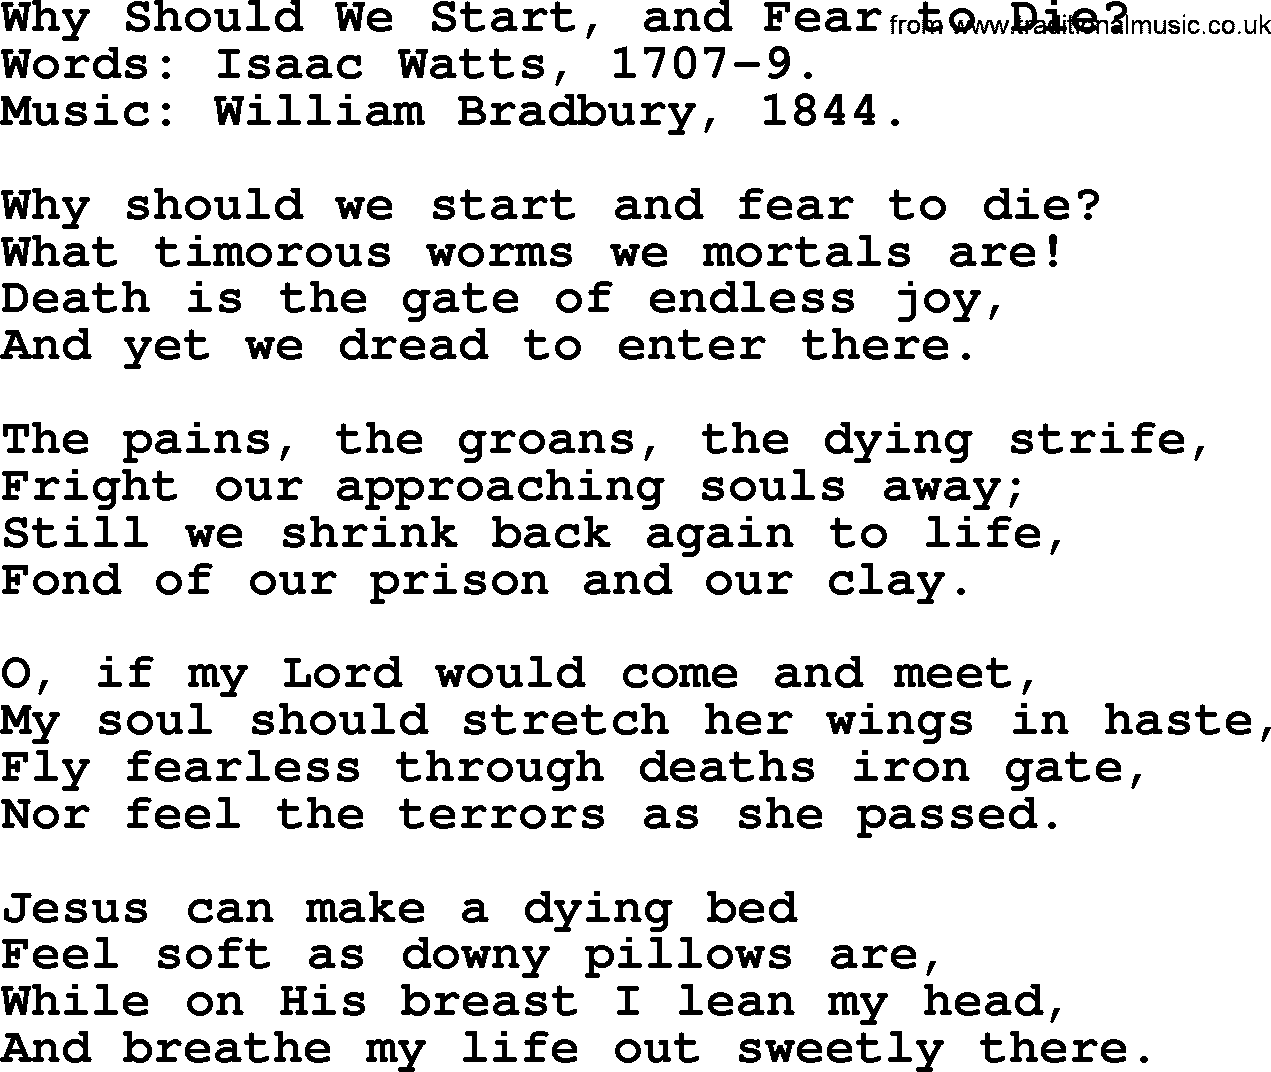 Isaac Watts Christian hymn: Why Should We Start, and Fear to Die_- lyricss